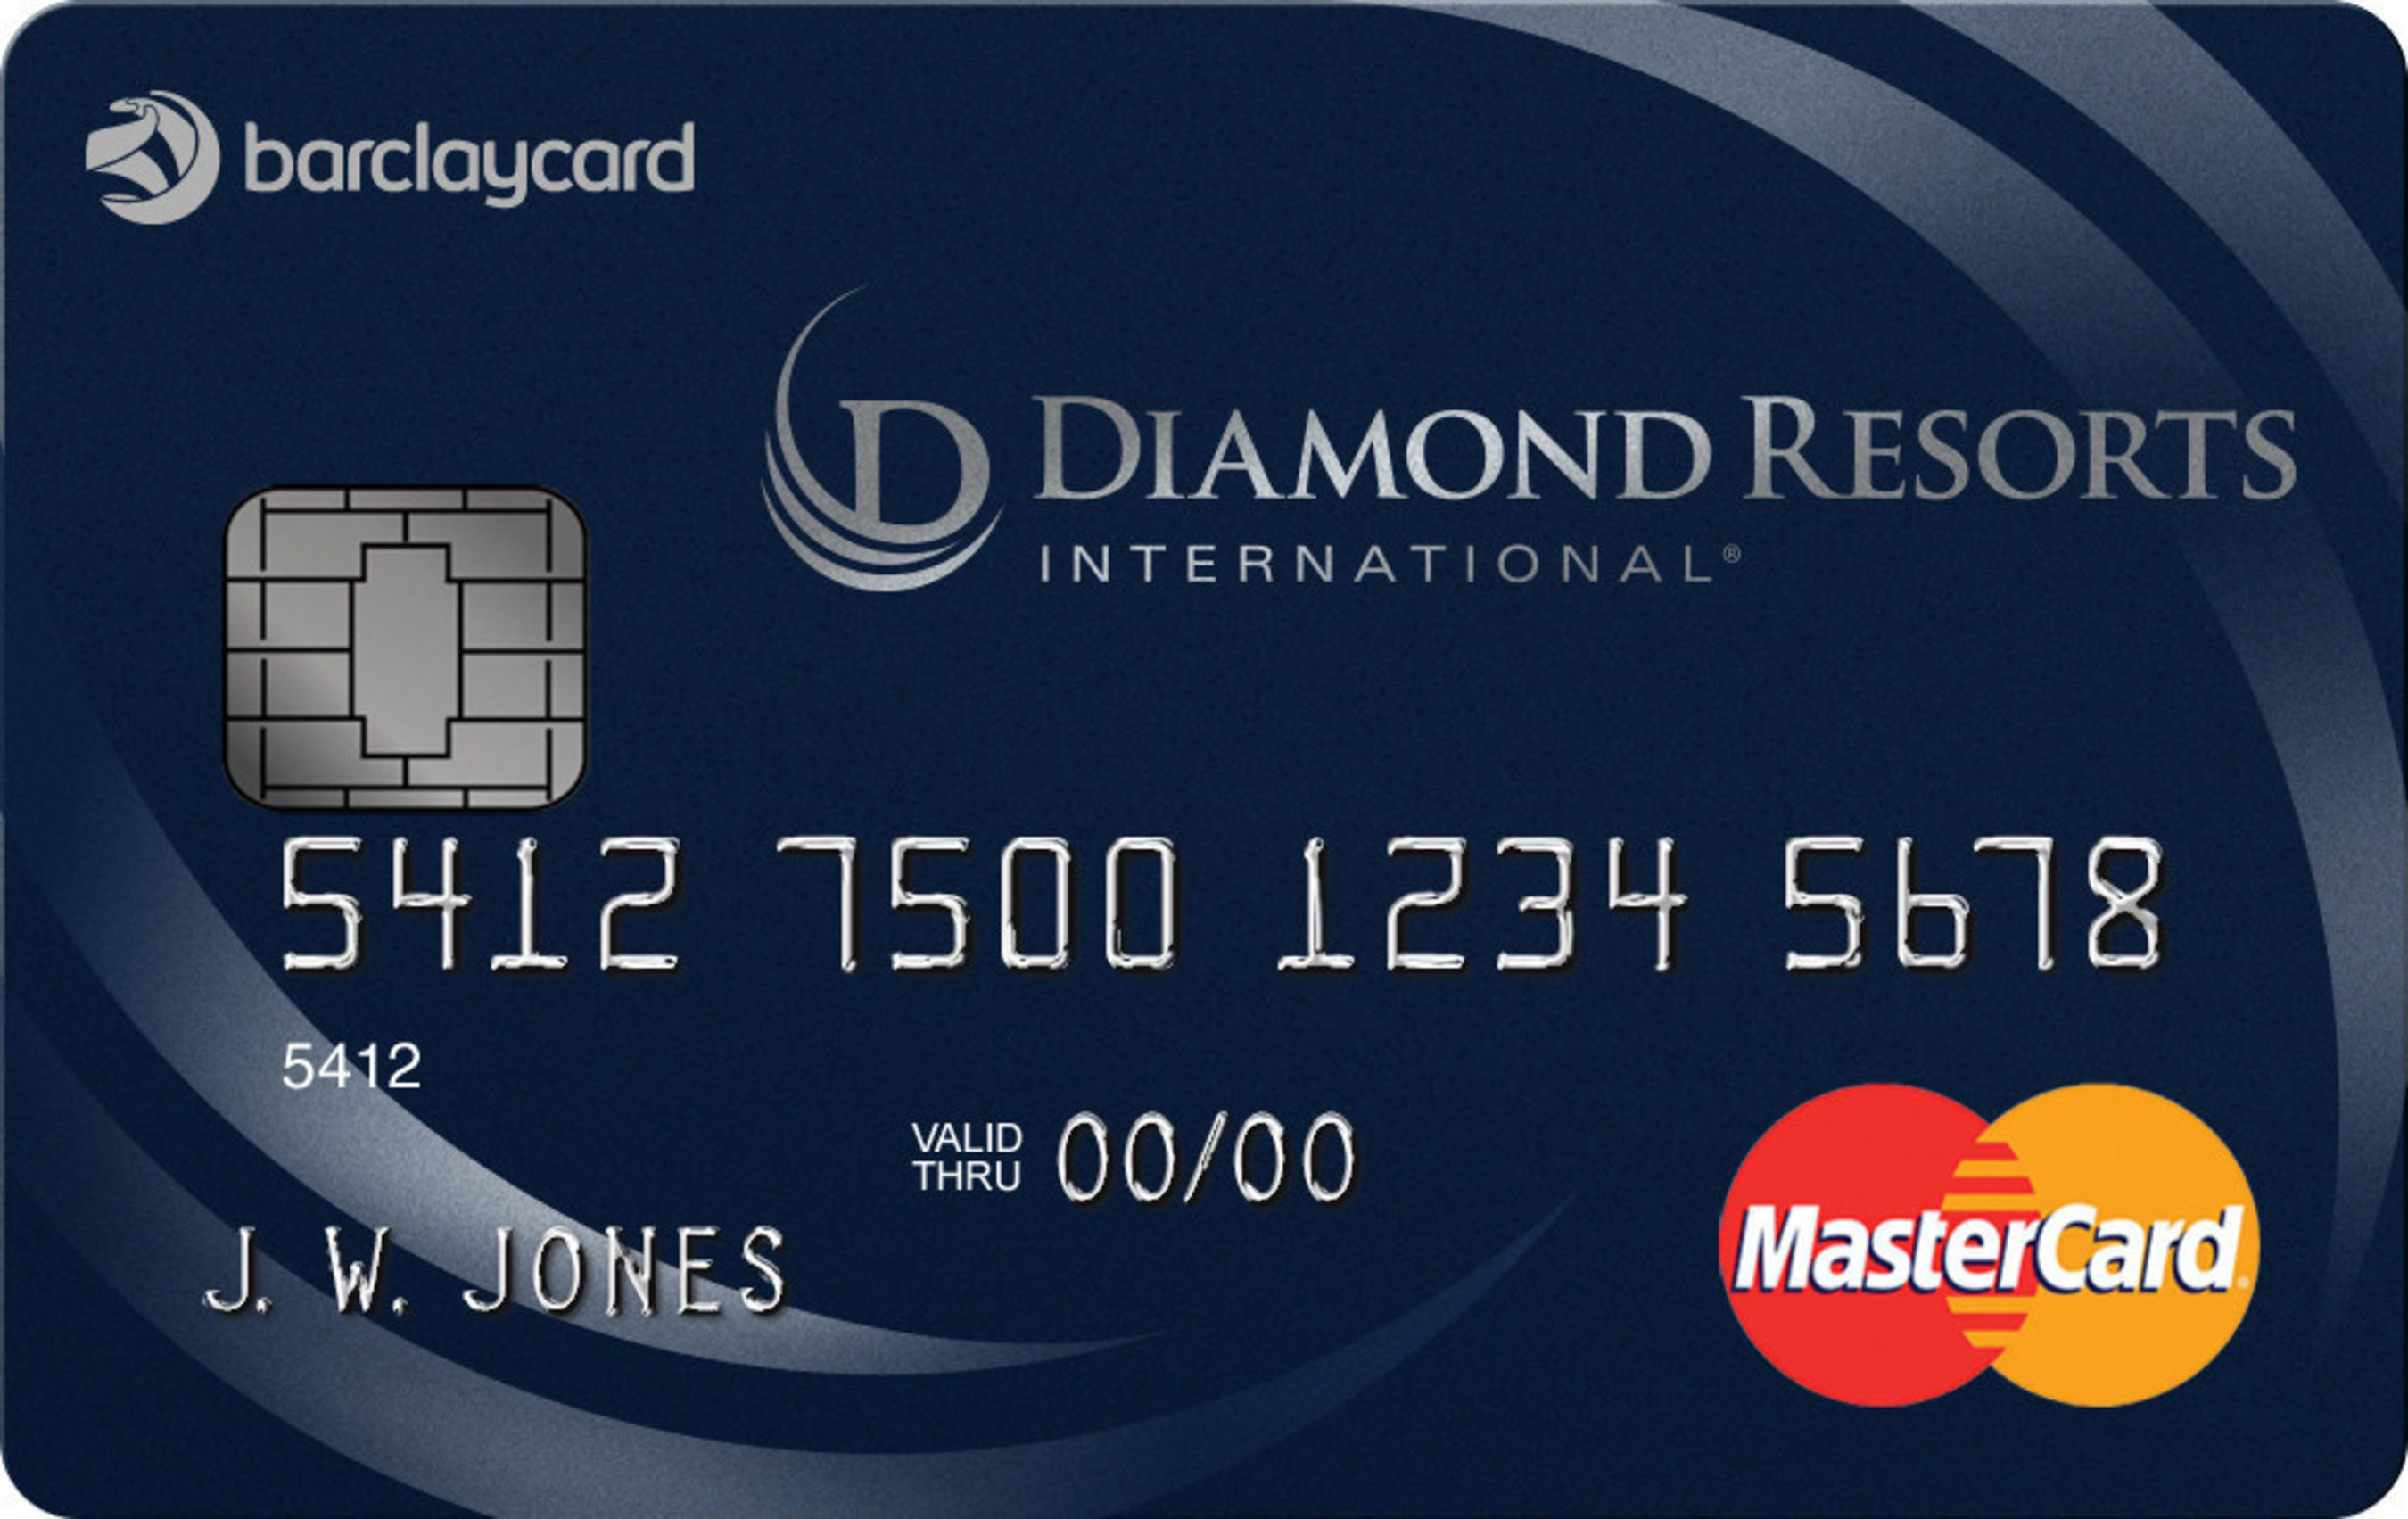 The new Diamond Resorts International(R),  MasterCard provides cardmembers the opportunity to Stay Vacationed.TM and enjoy Vacations for Life(R).